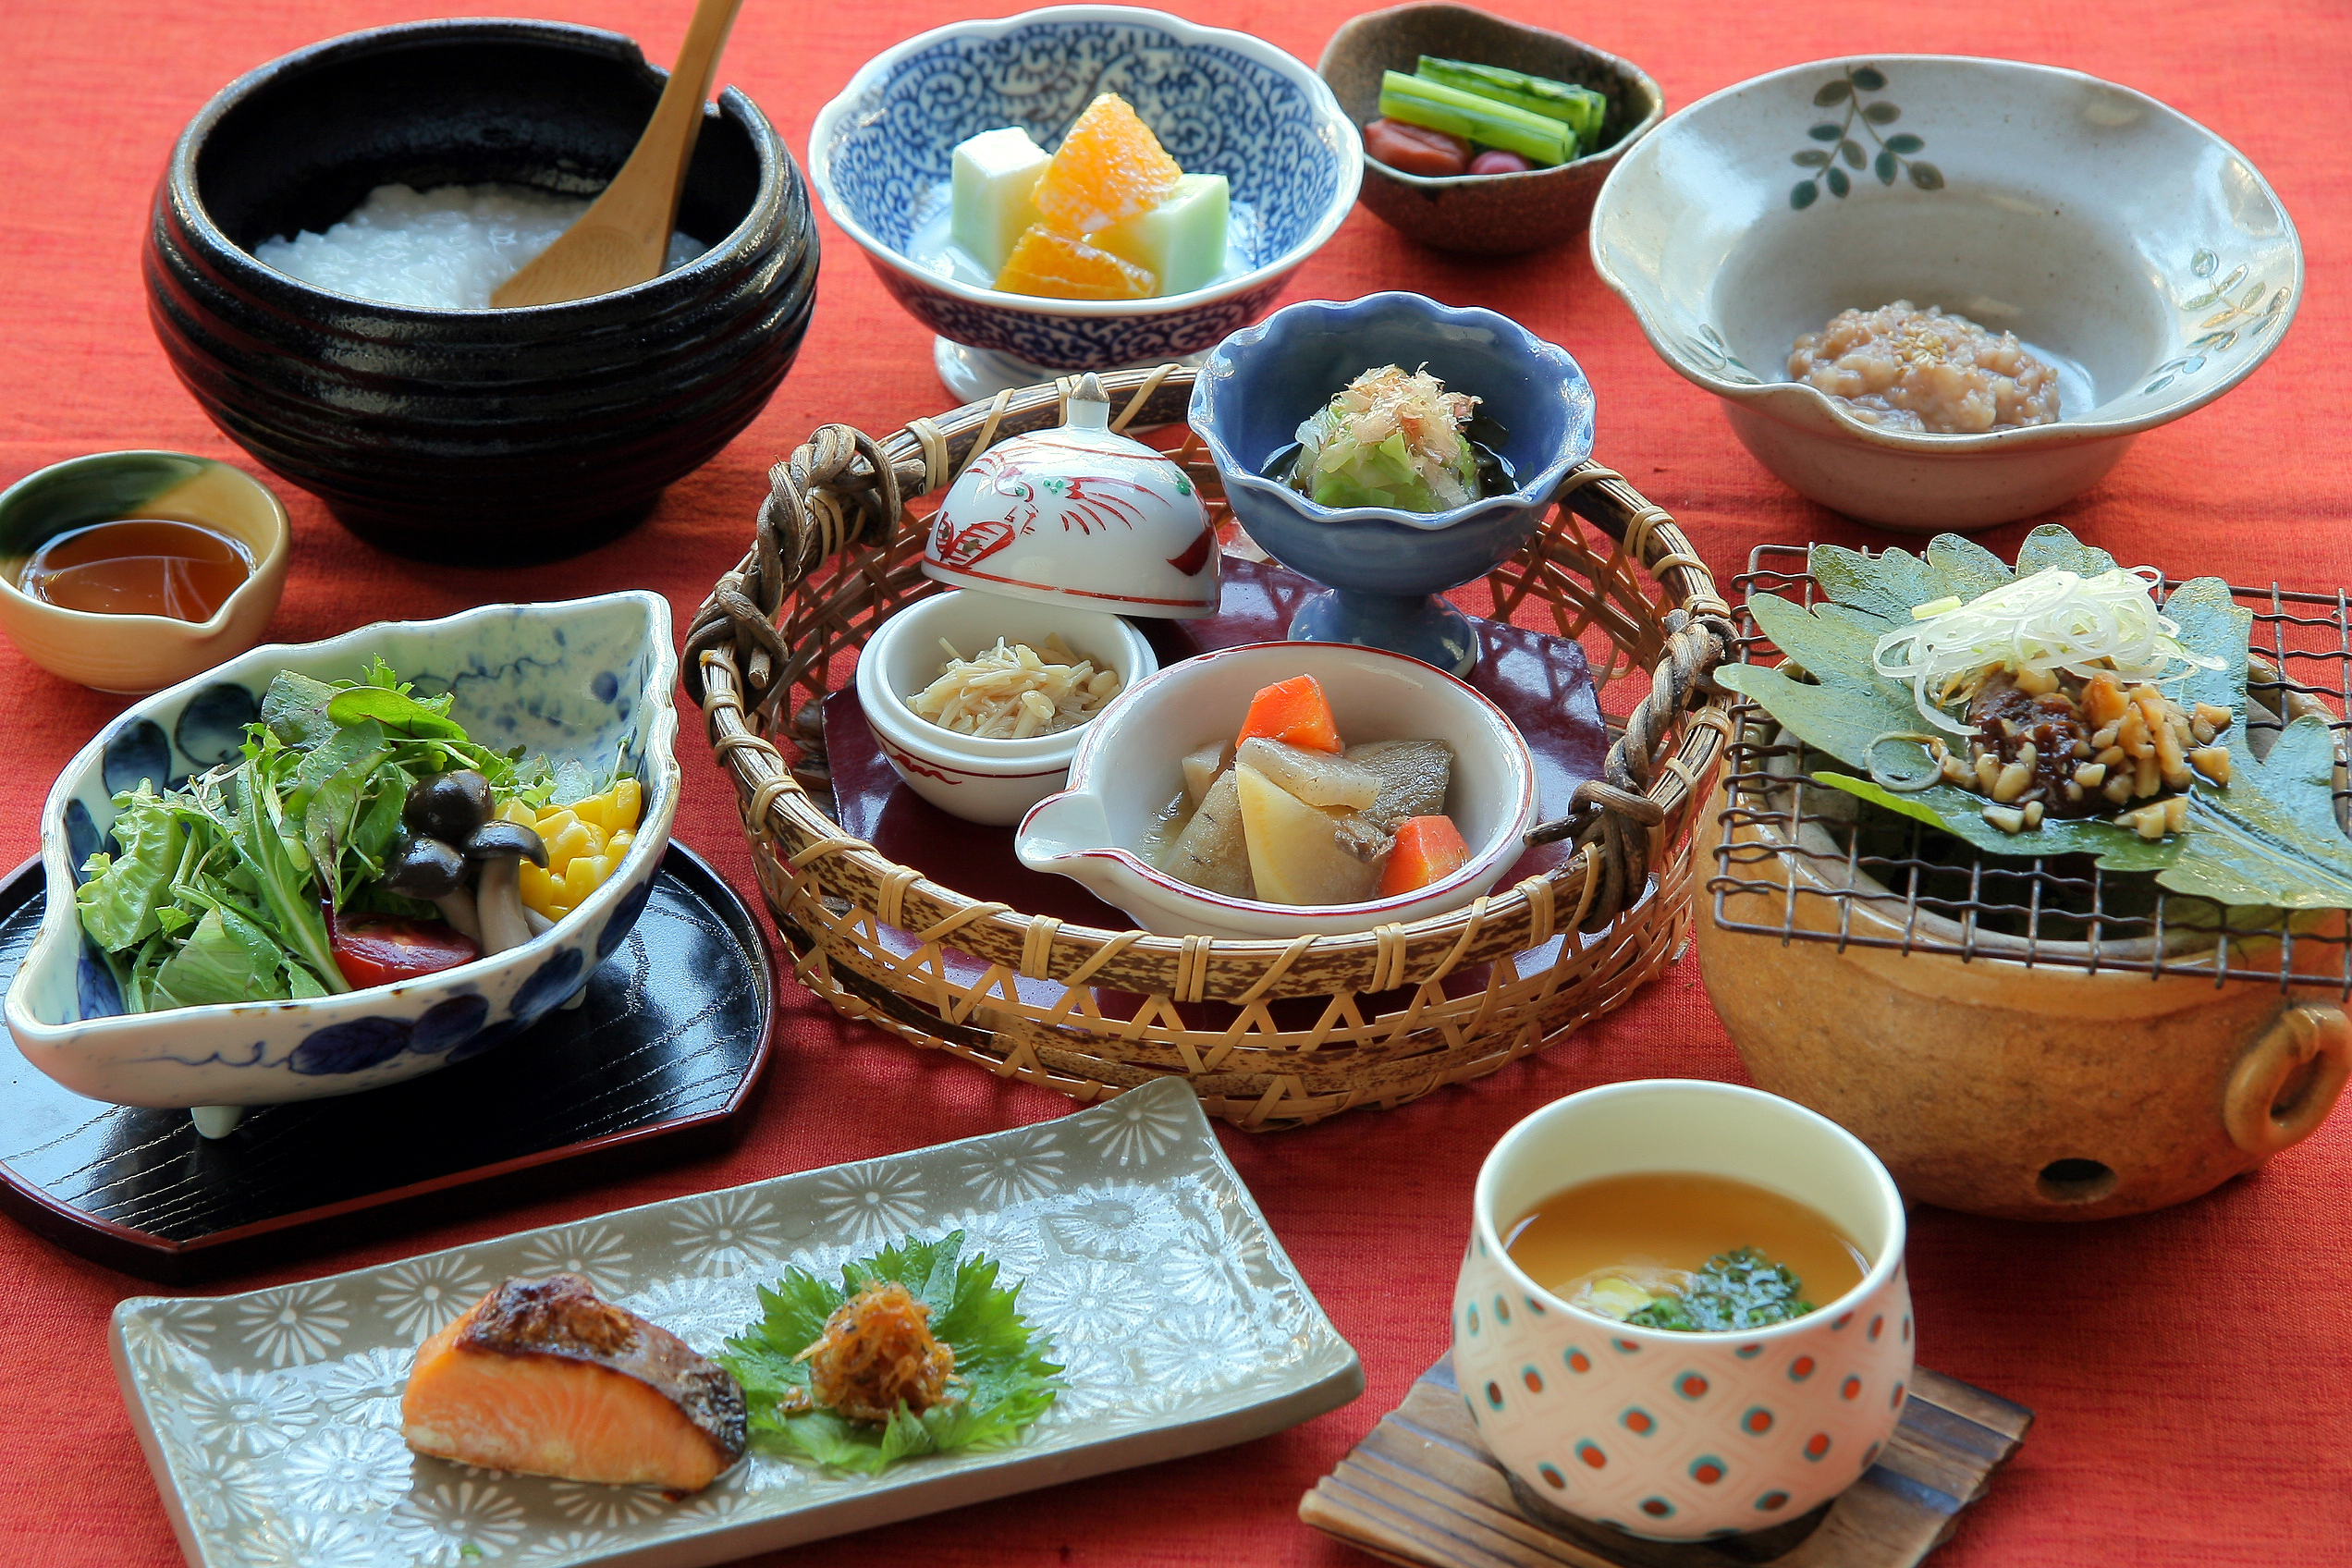 Senjukaku is Renowned for its Traditional 'Kaiseki' Meal Service